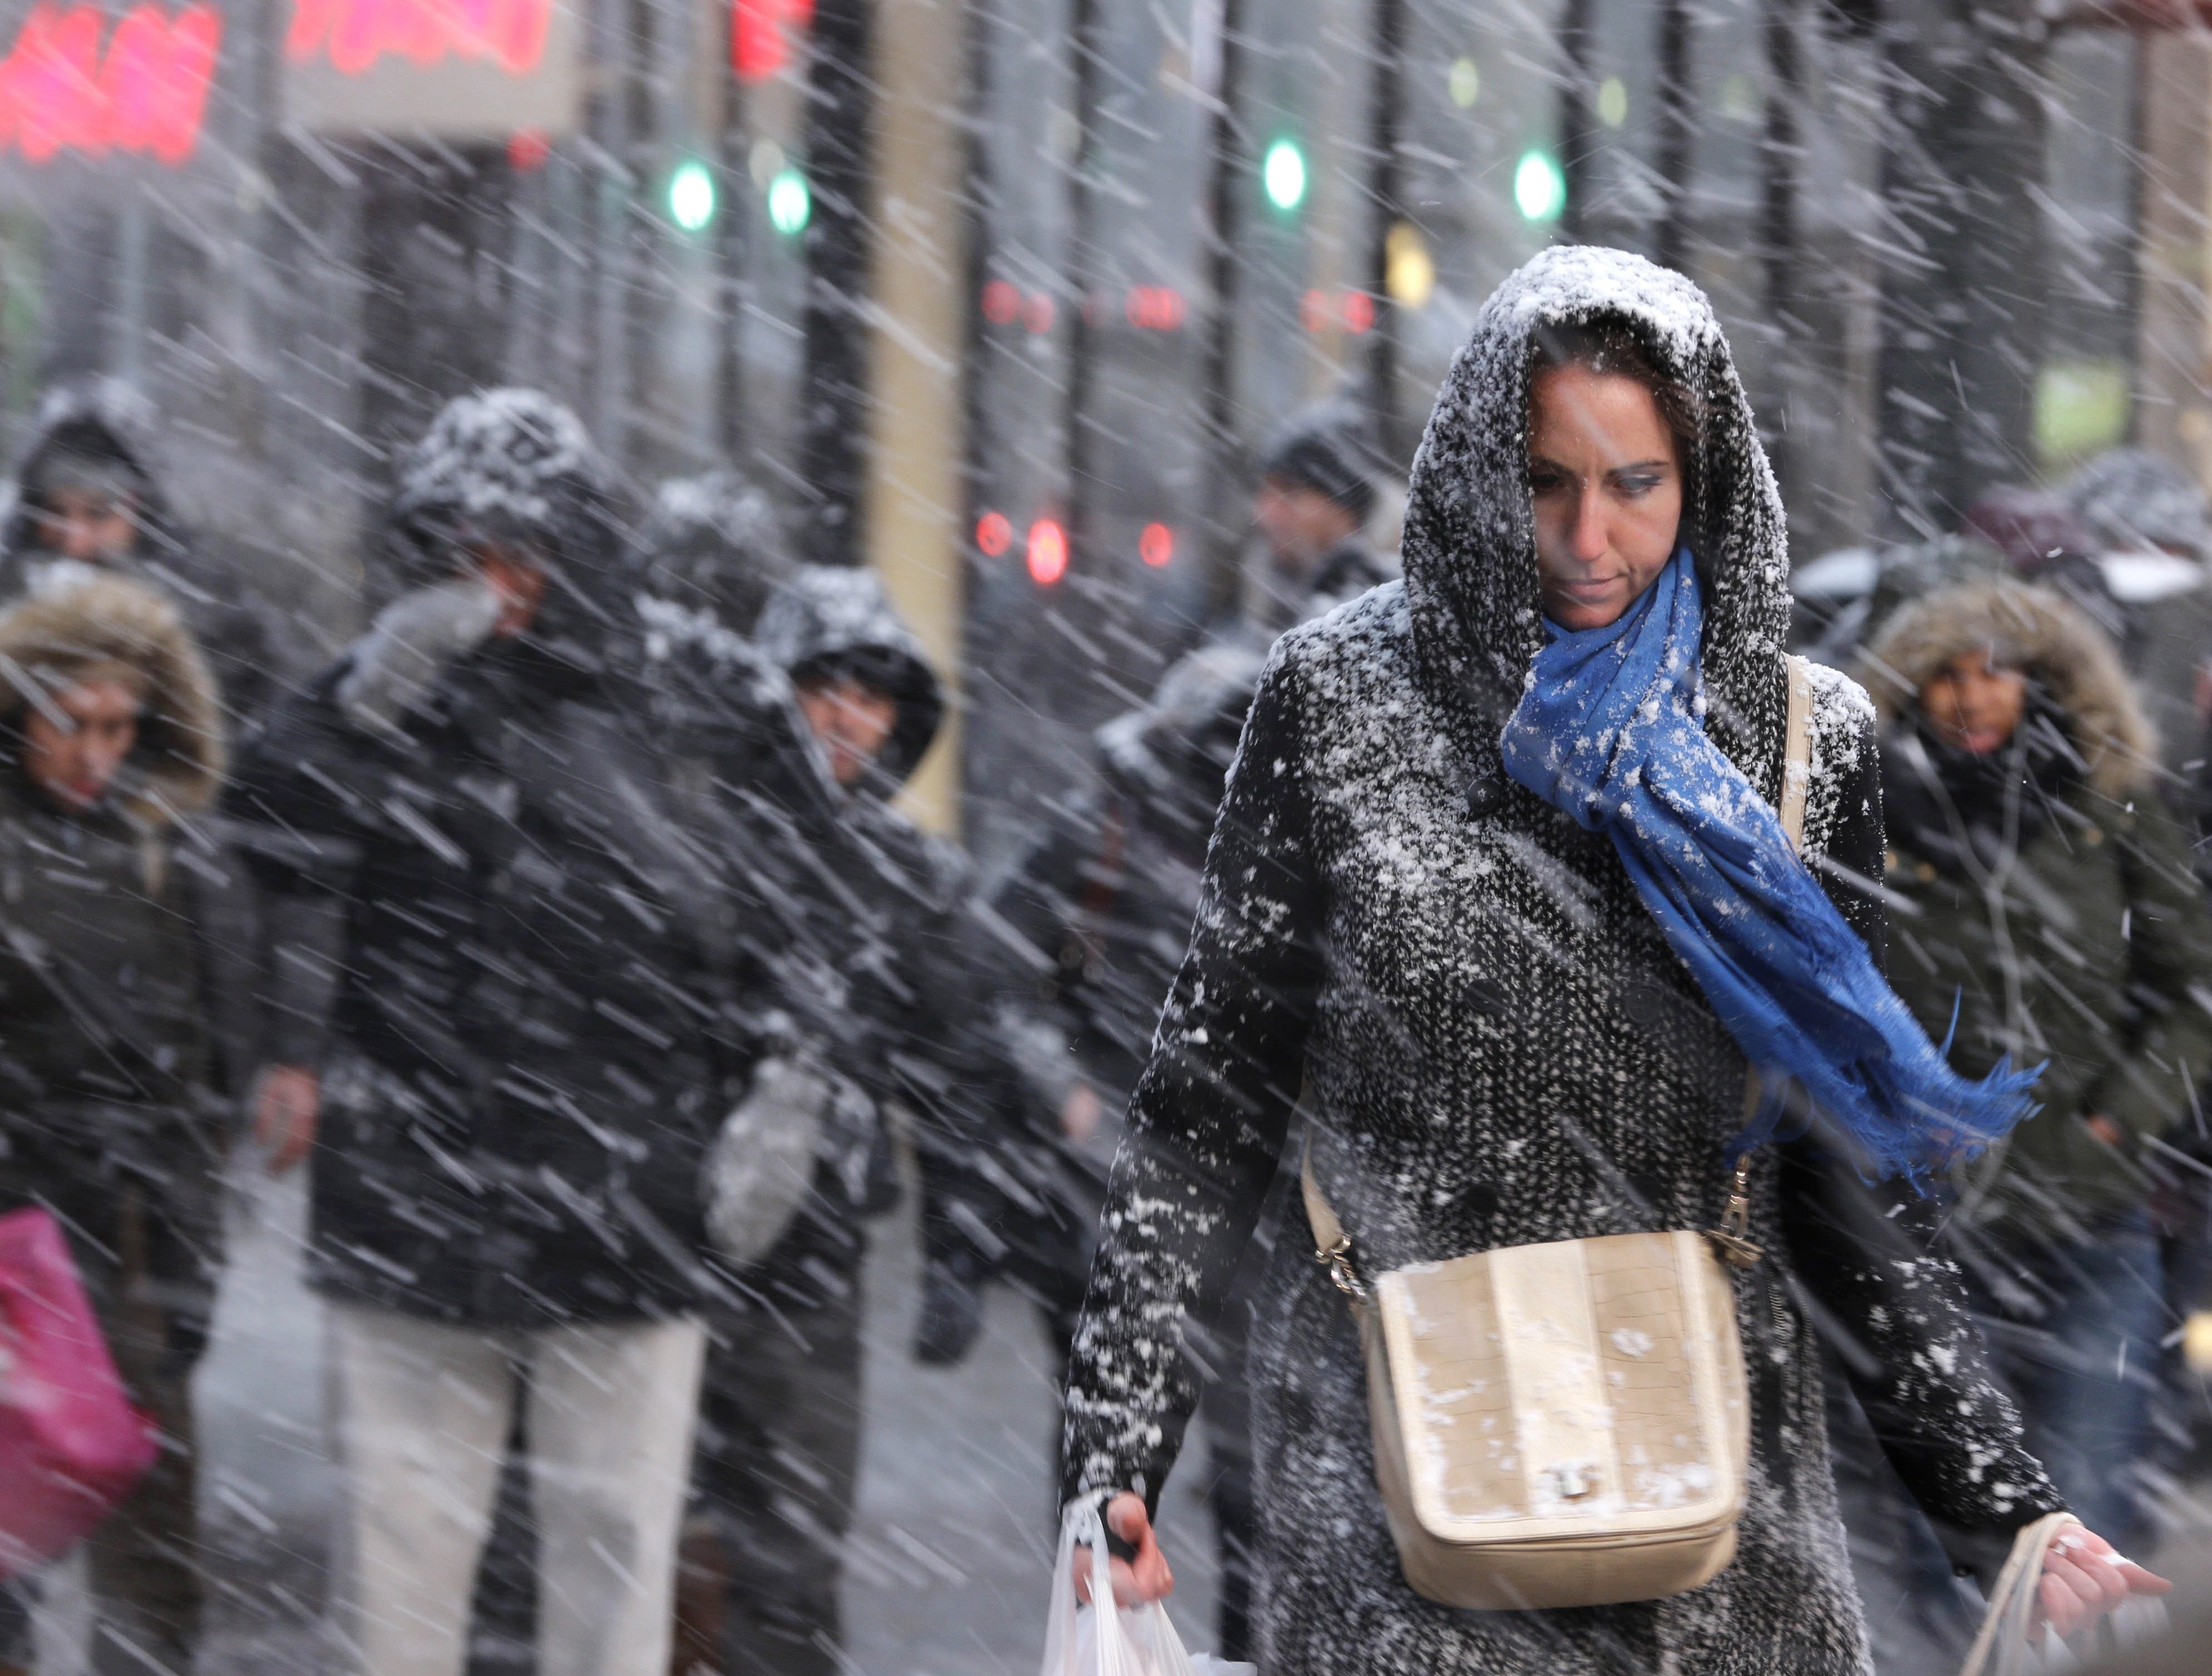 Millions hunker down as mighty storm blasts Northeast